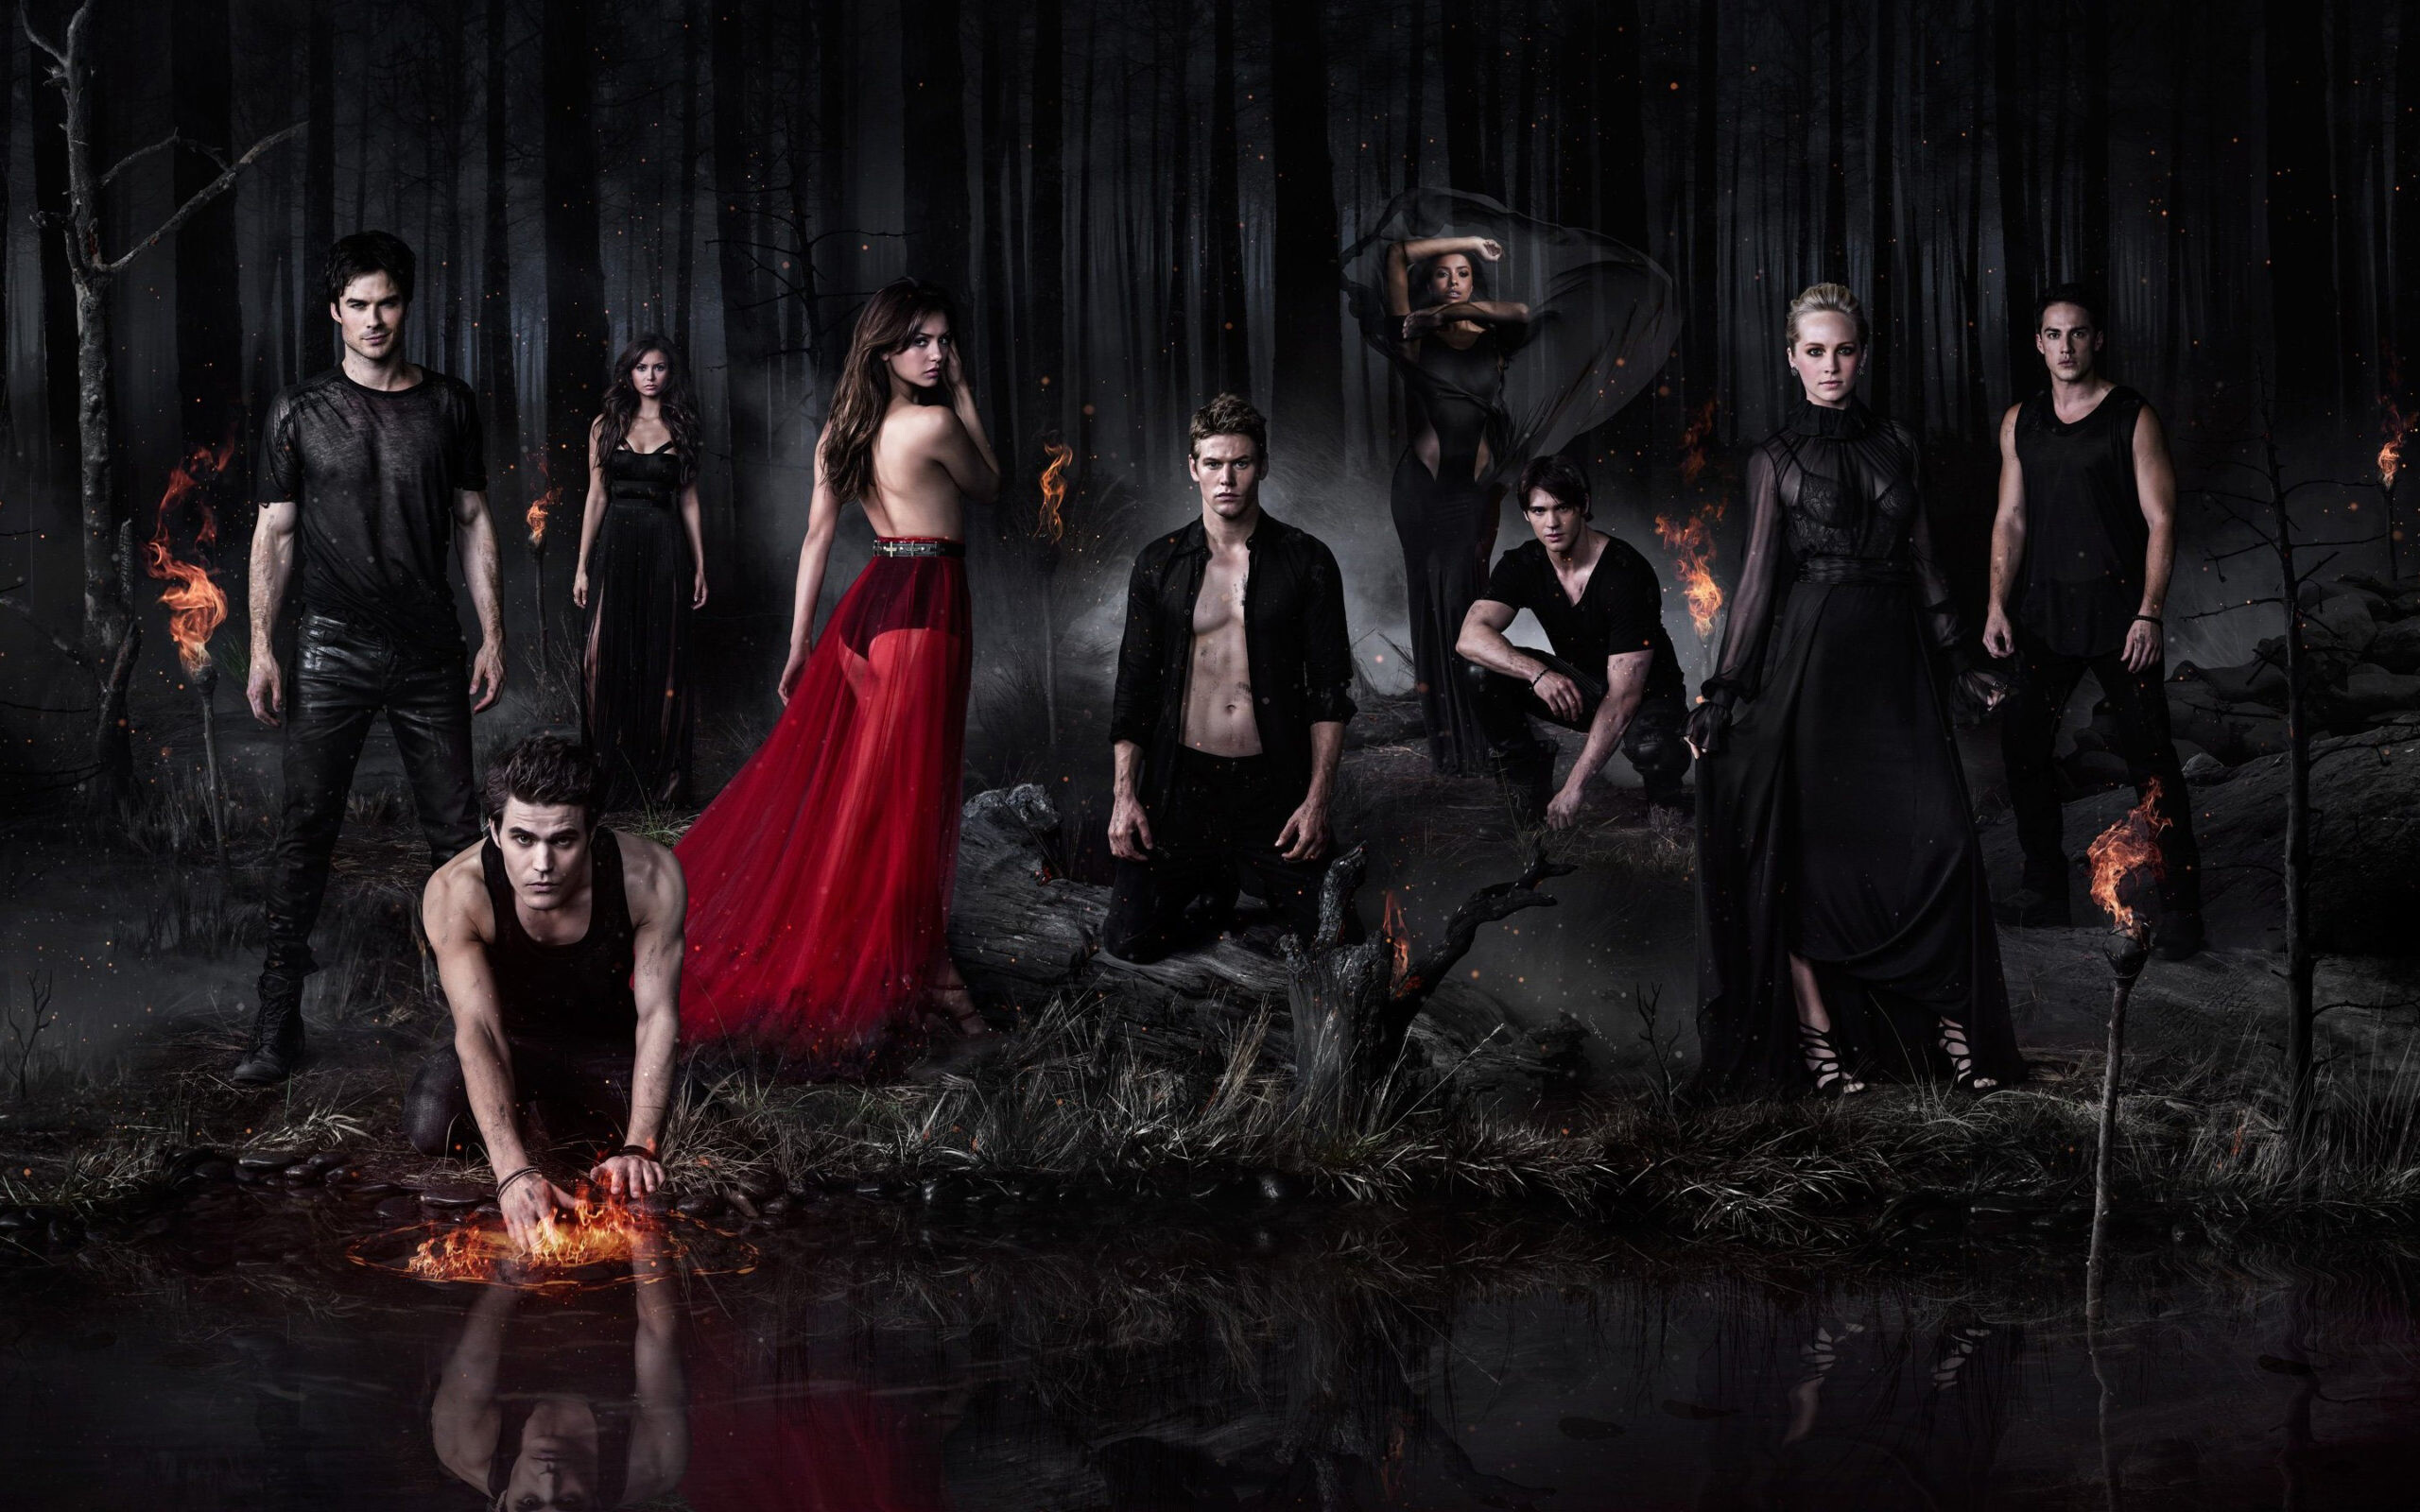 The Vampire Diaries (TV Series): TV Show Poster, Main Characters, Vampires, Werewolves, Witches. 2560x1600 HD Wallpaper.